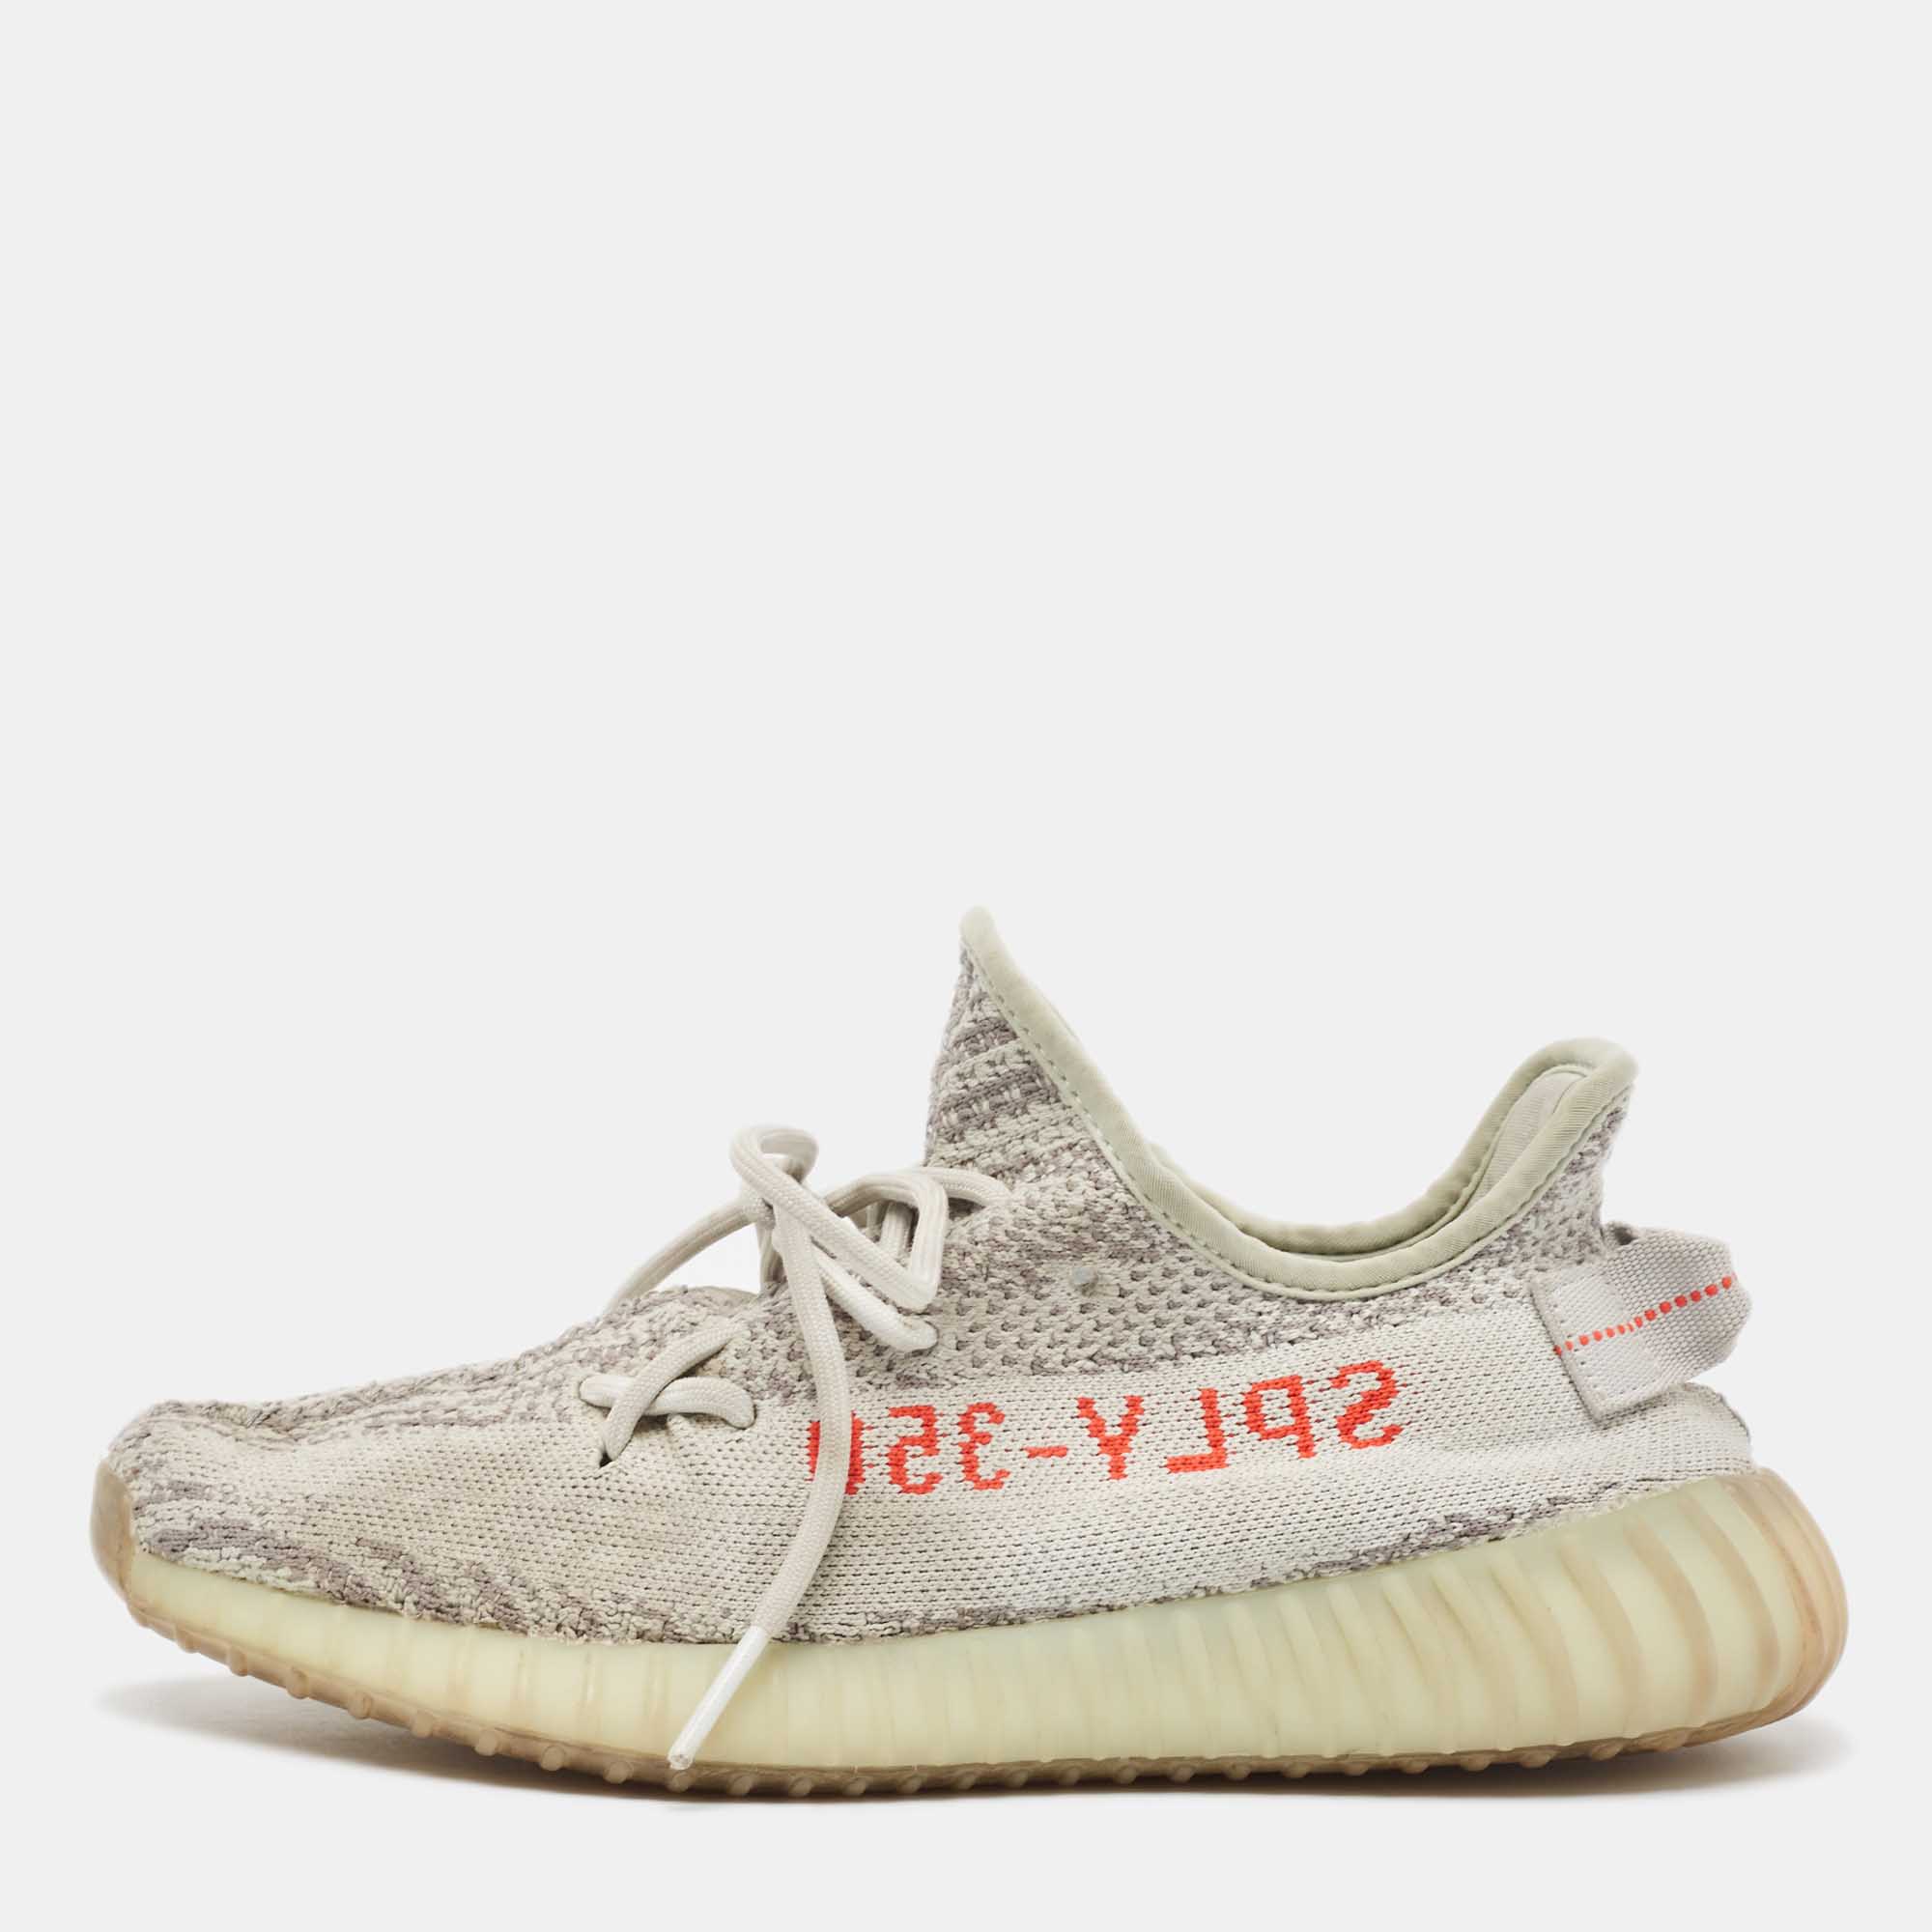 Yeezy x adidas two tone knit fabric boost 350 v2 blue tint sneakers size 40 2/3